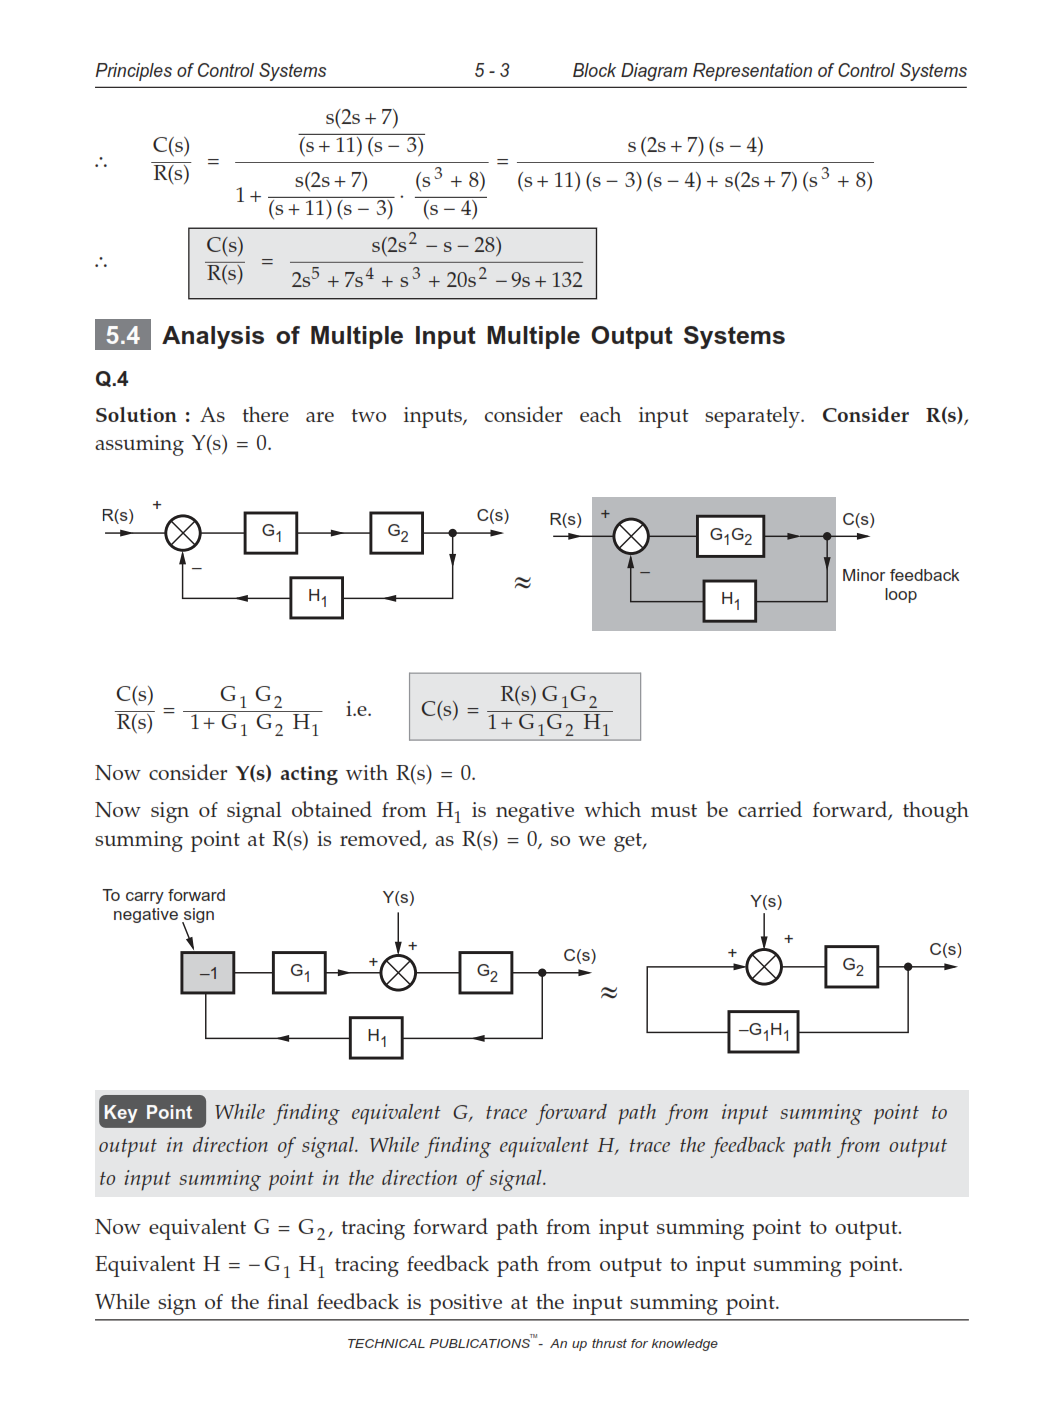 download free Principle of Control System solution manual written by Bakshi eBook in pdf format | Gioumeh free eBook reference